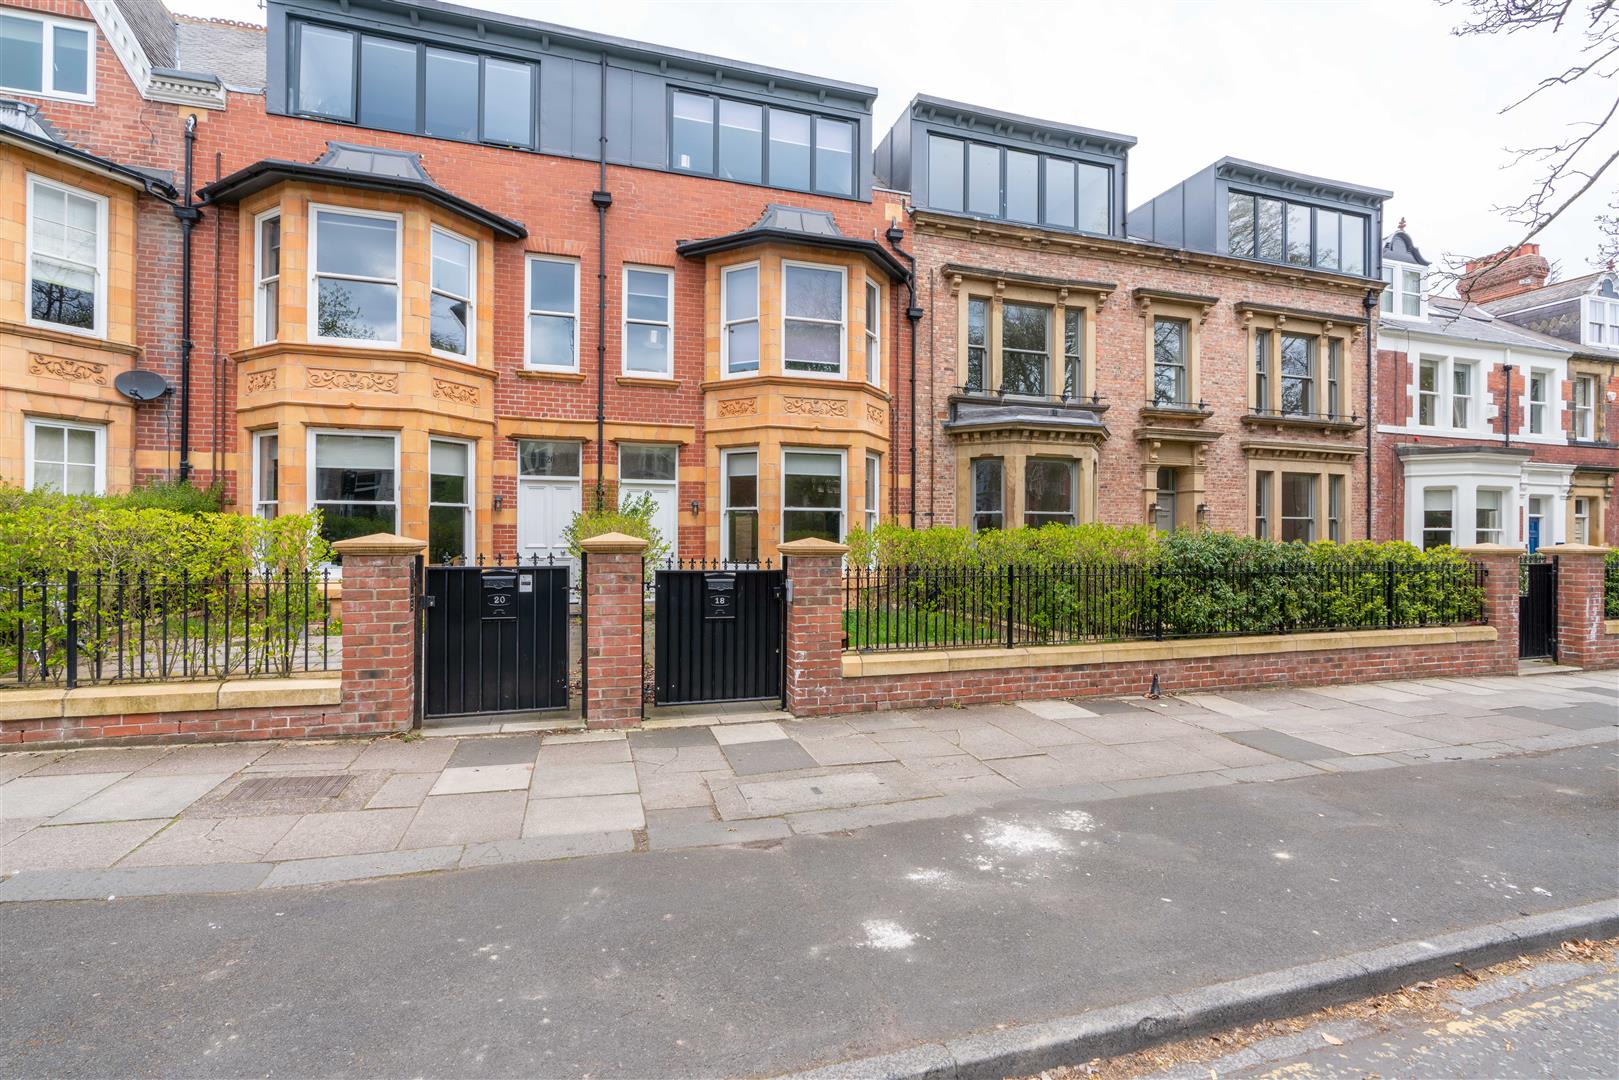 2 bed apartment to rent in West Avenue, Gosforth, NE3 